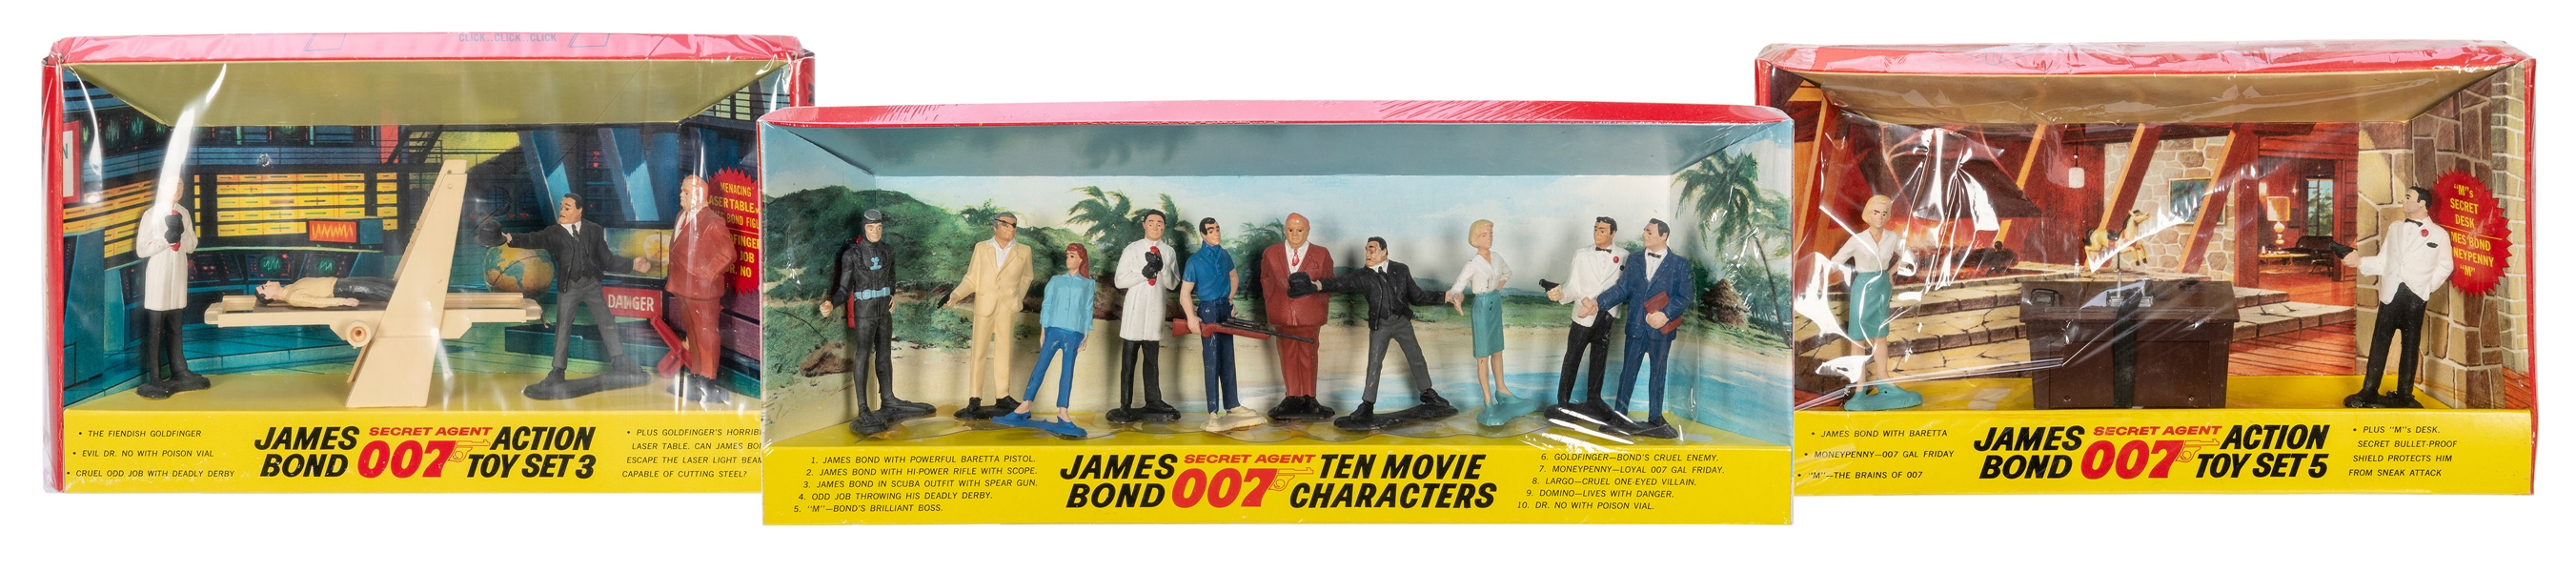  James Bond 007 A.C. Gilbert Action Toys and Sets (7). A.C. ...